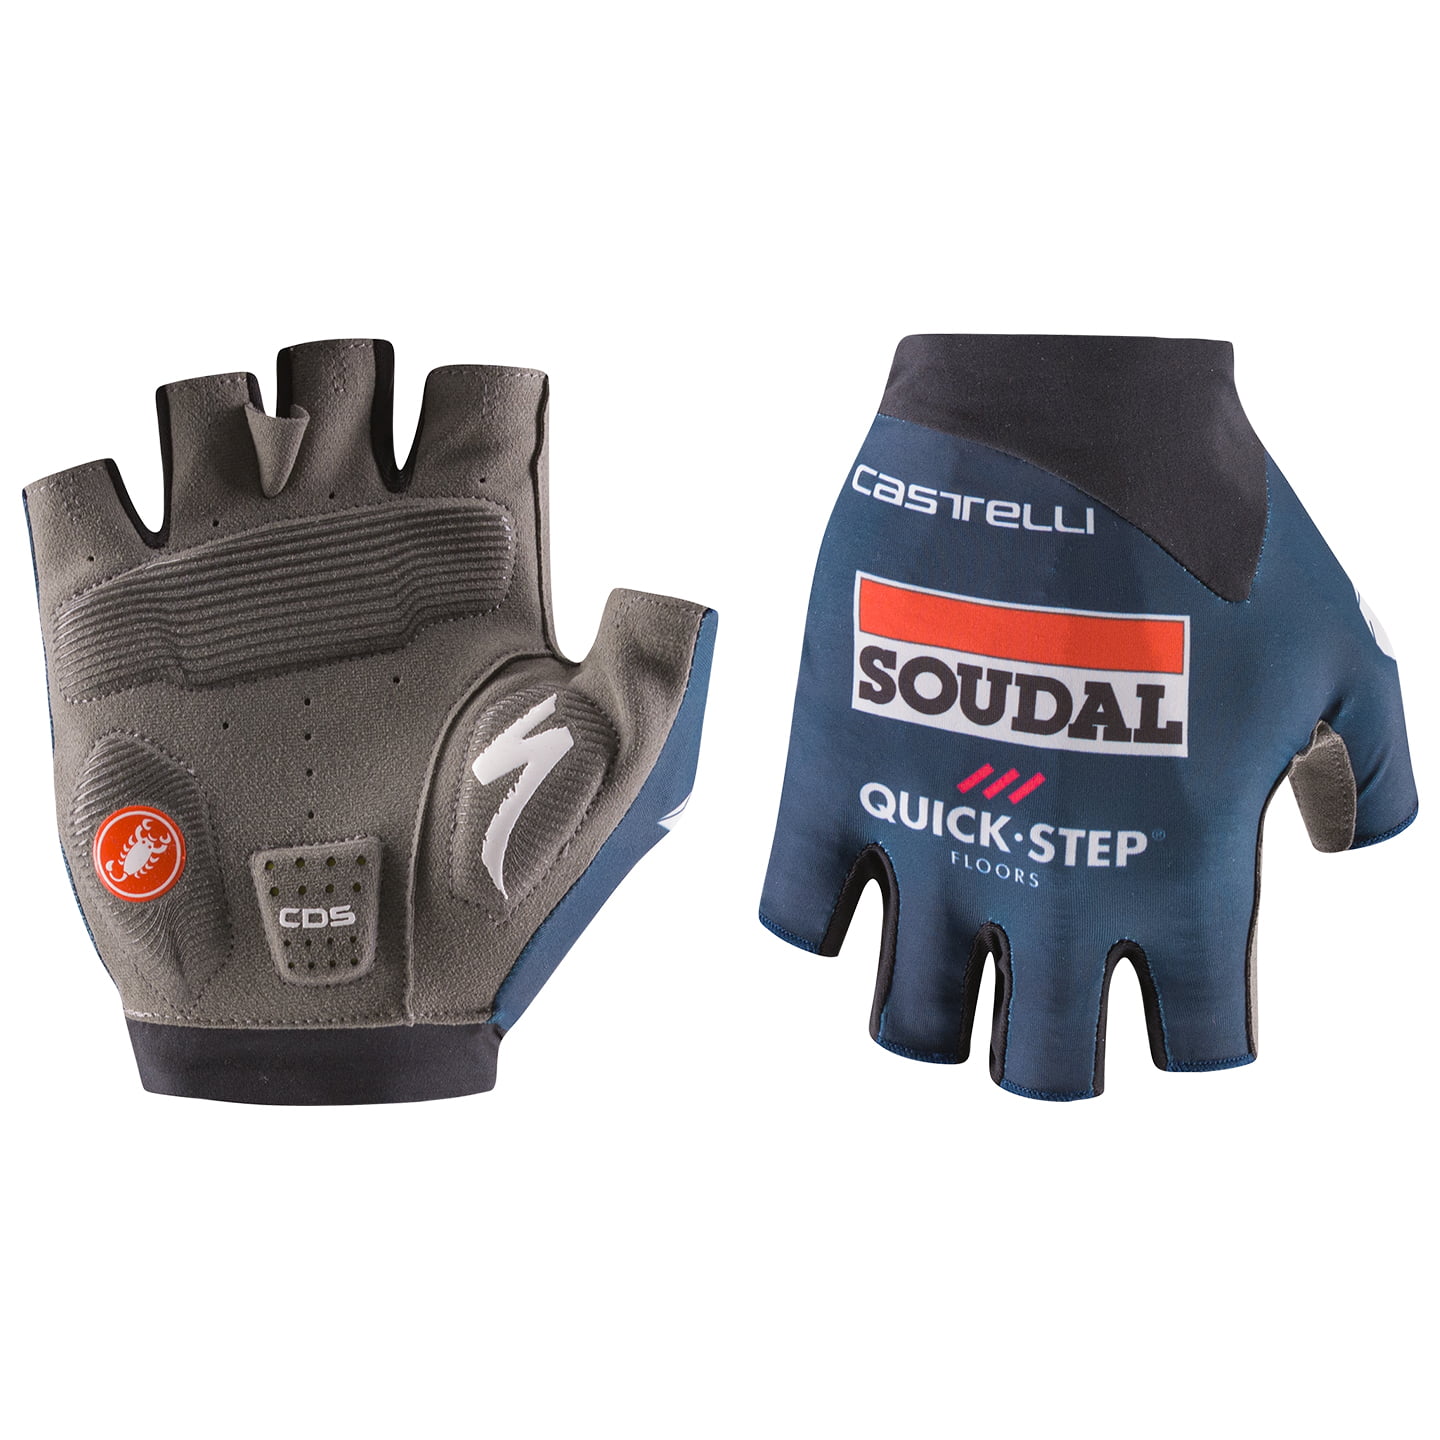 SOUDAL QUICK-STEP 2023 Cycling Gloves, for men, size L, Cycling gloves, Bike gear